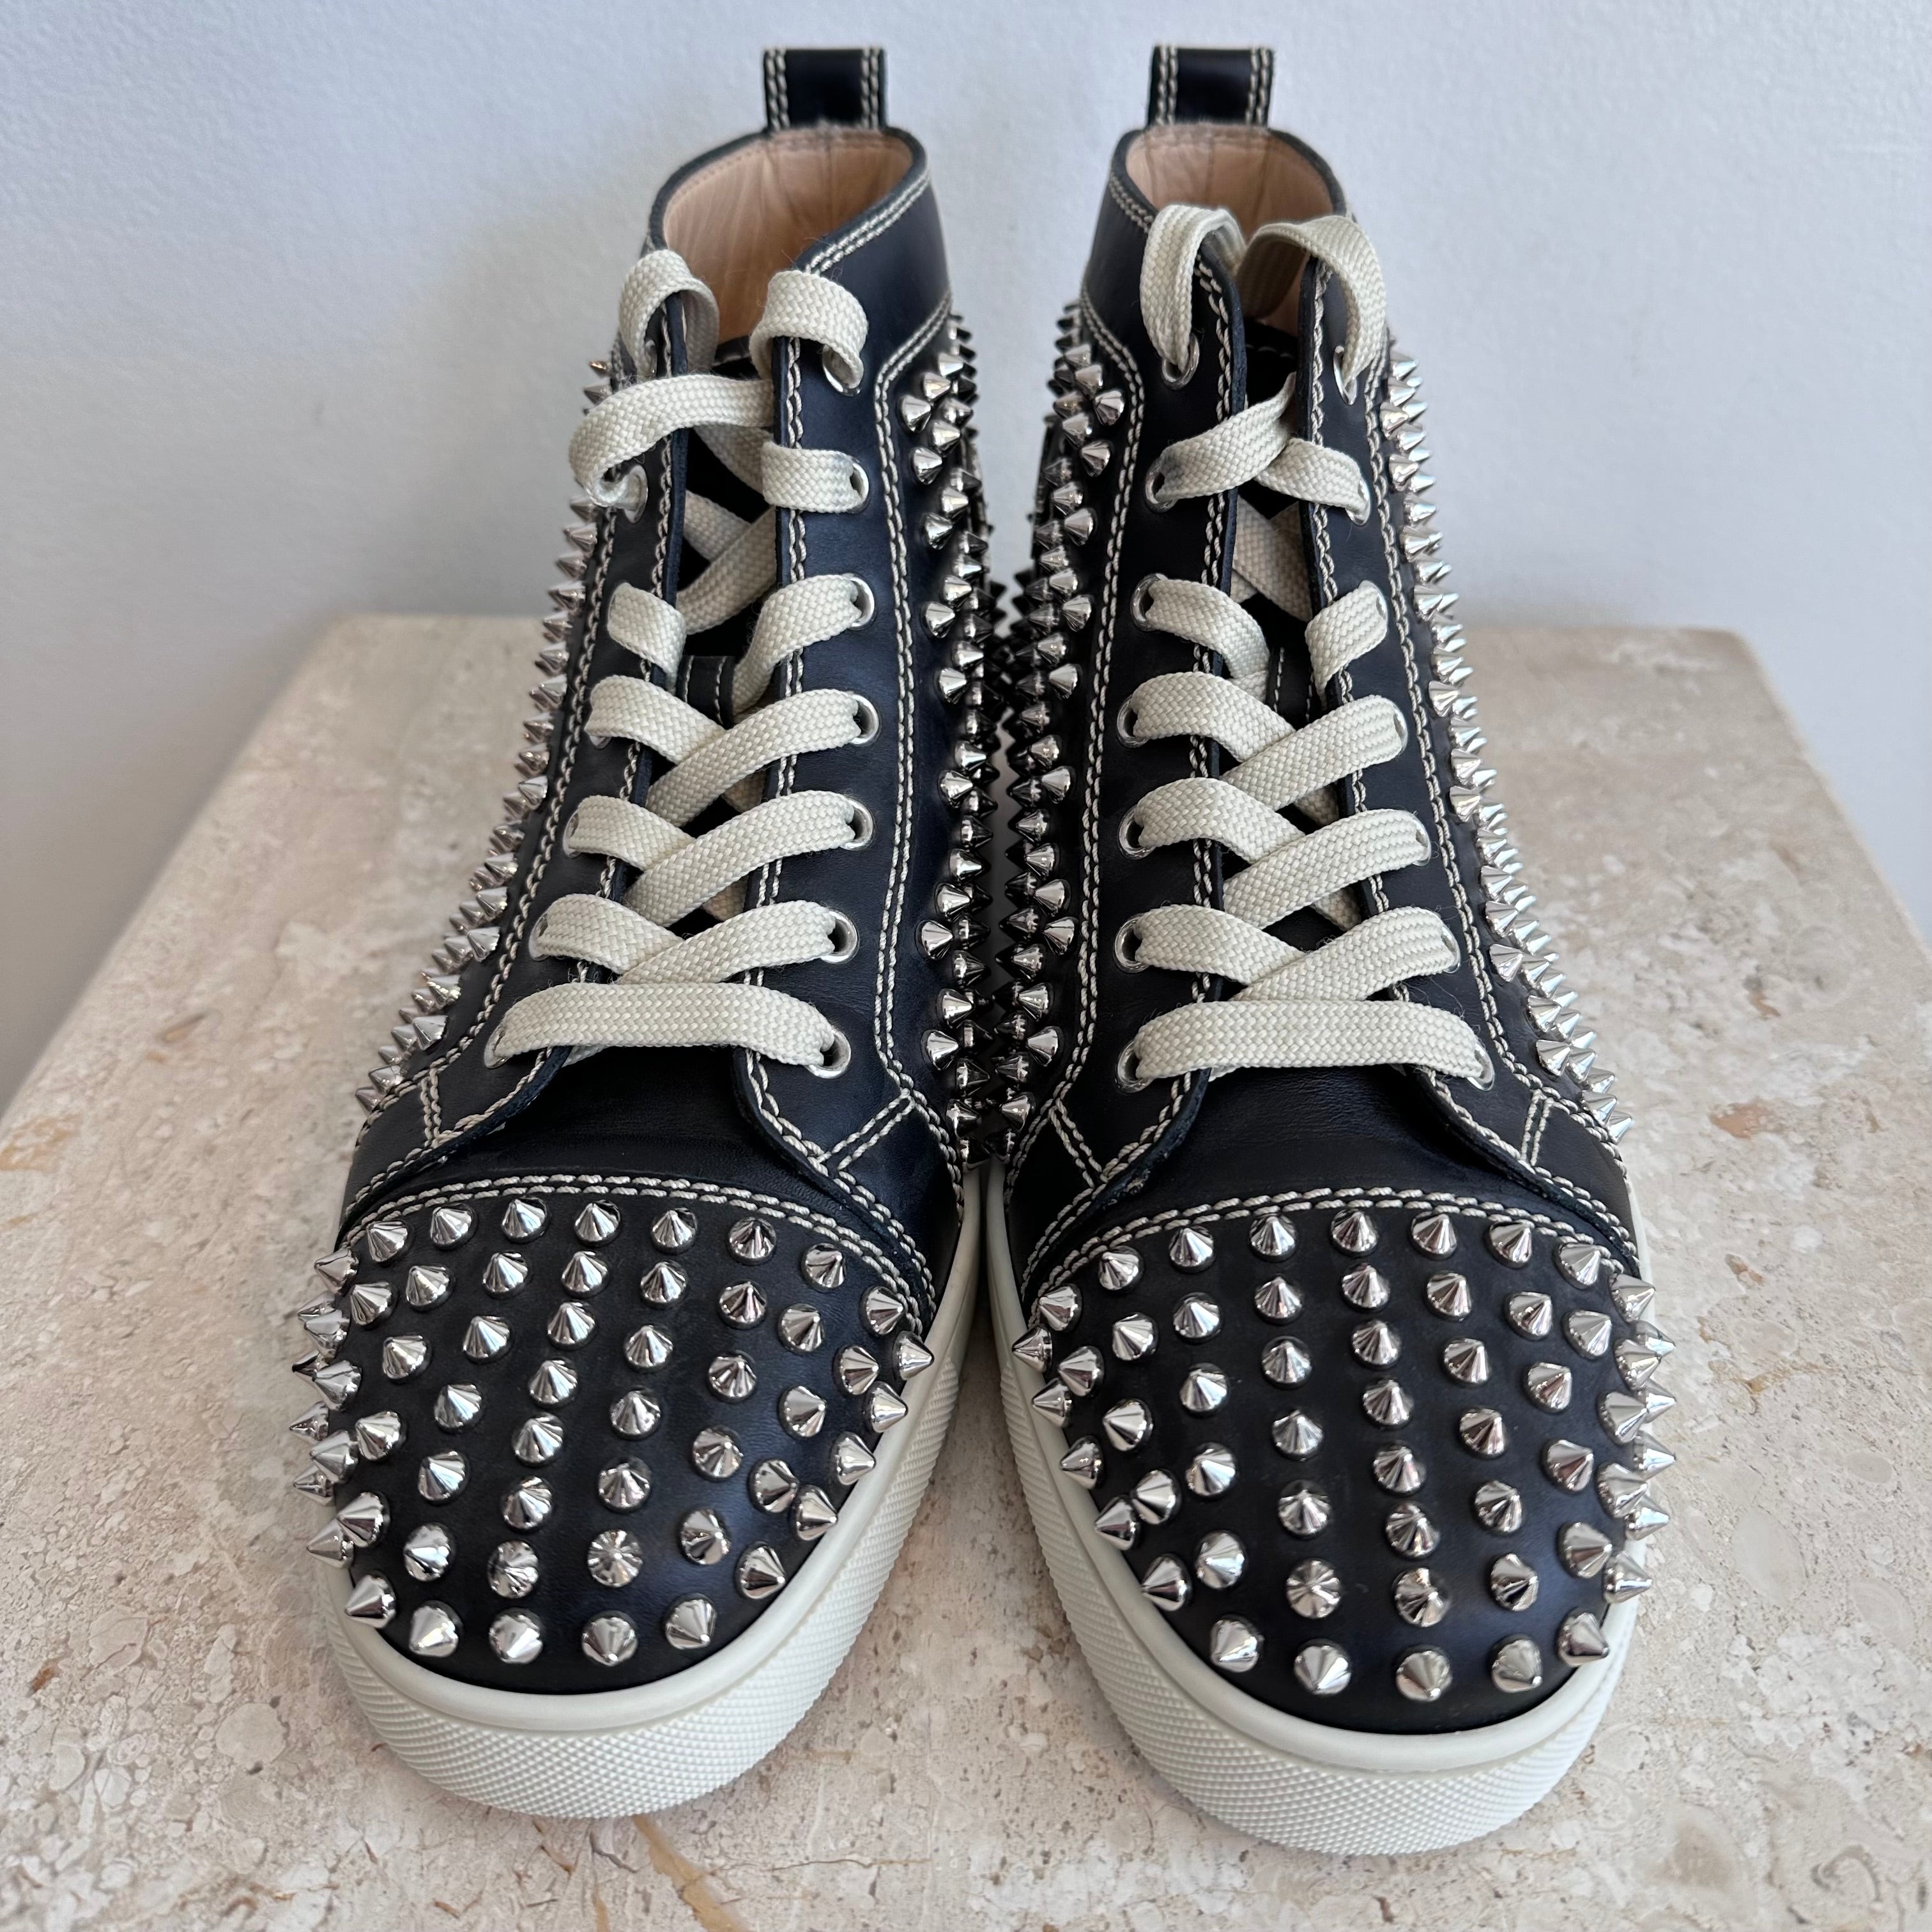 Pre-Owned CHRISTIAN LOUBOUTIN Black Men's Louis Mid-Top Spiked Leather Sneakers Size 41